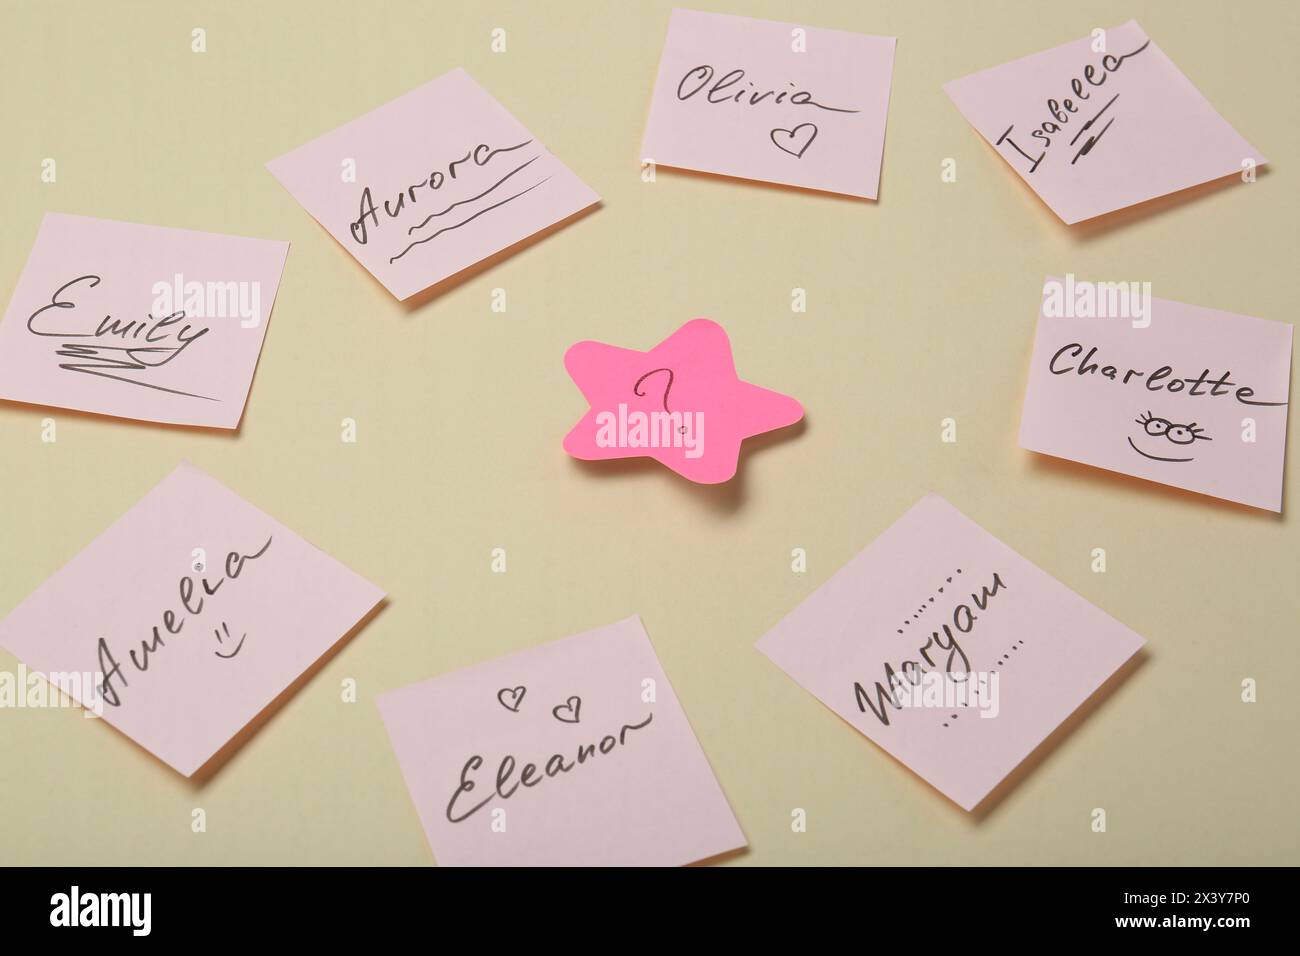 Choosing baby name. Paper stickers with different names and question mark on beige background Stock Photo